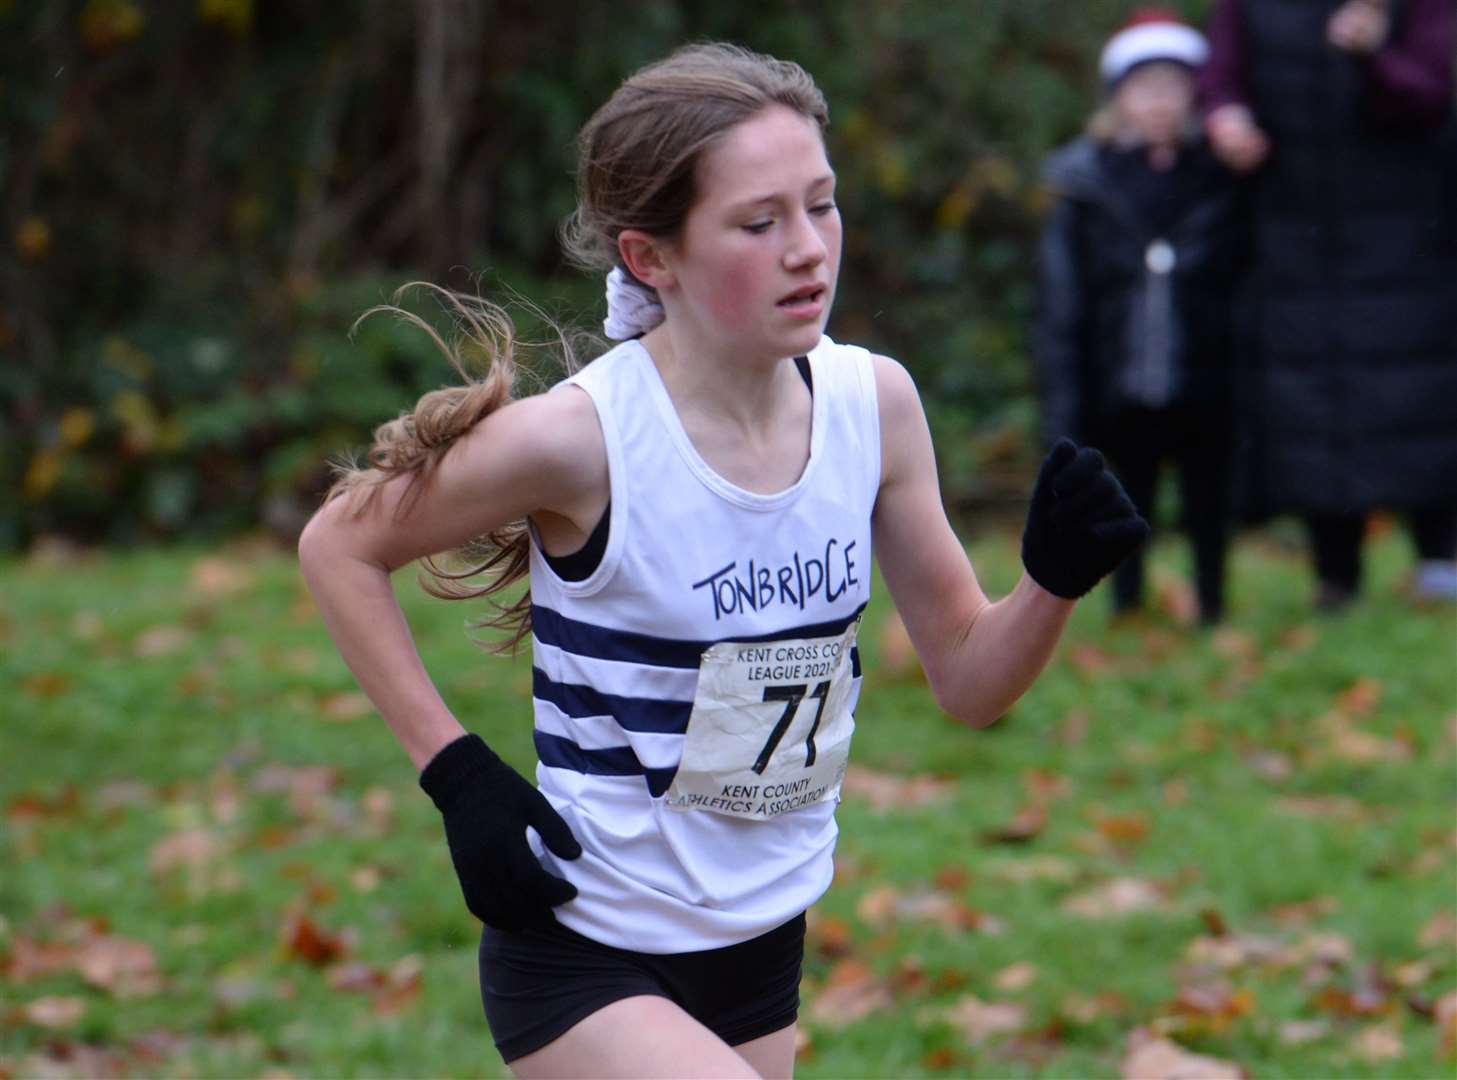 Millie Watts of Tonbridge AC secures second place in the under-13 girls' race. Picture: Chris Davey (53364400)